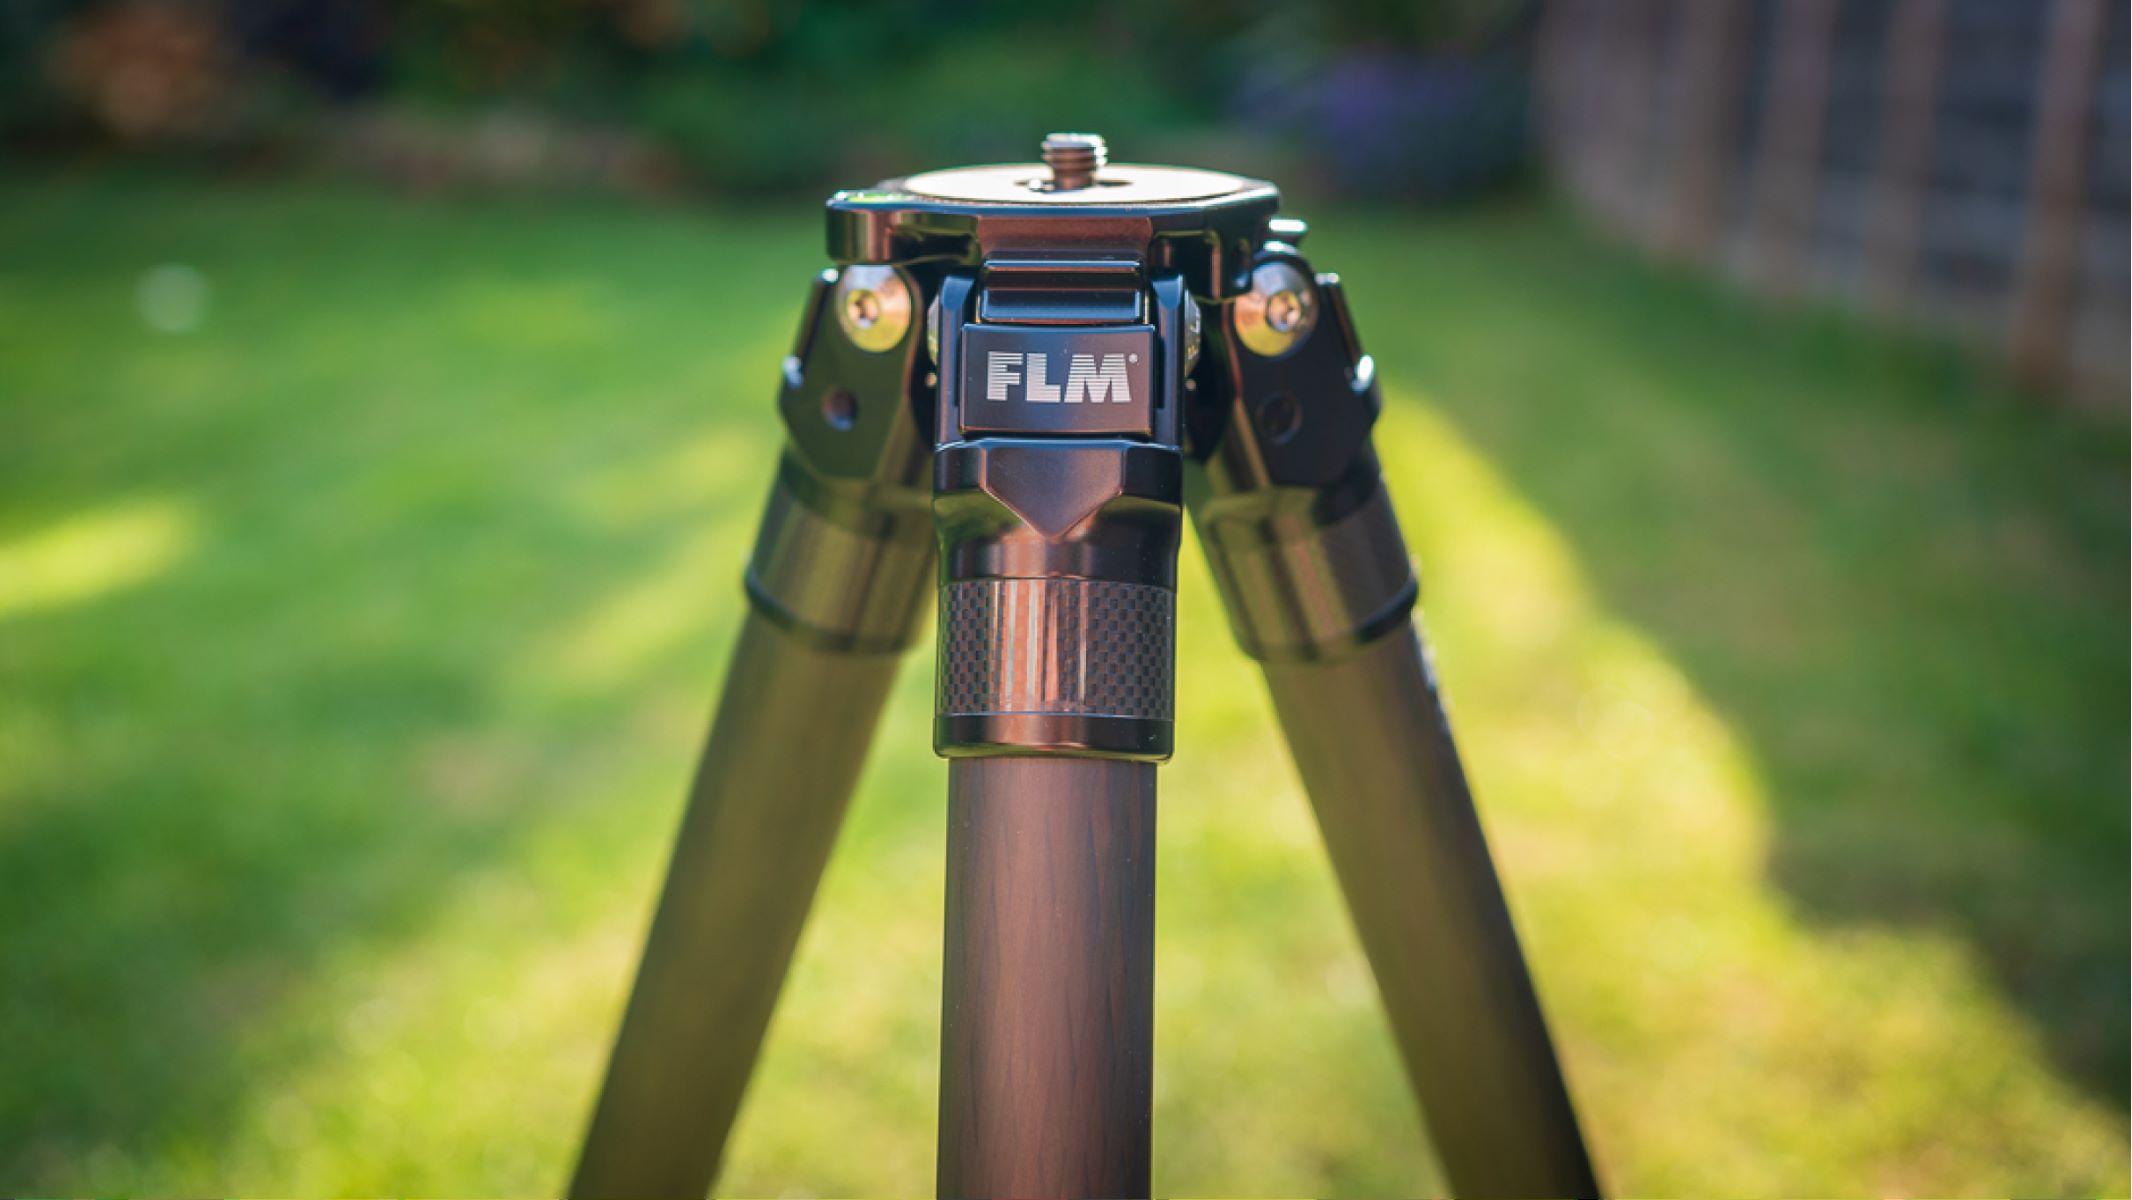 screw-sizing-identifying-the-standard-screw-size-for-camera-tripods